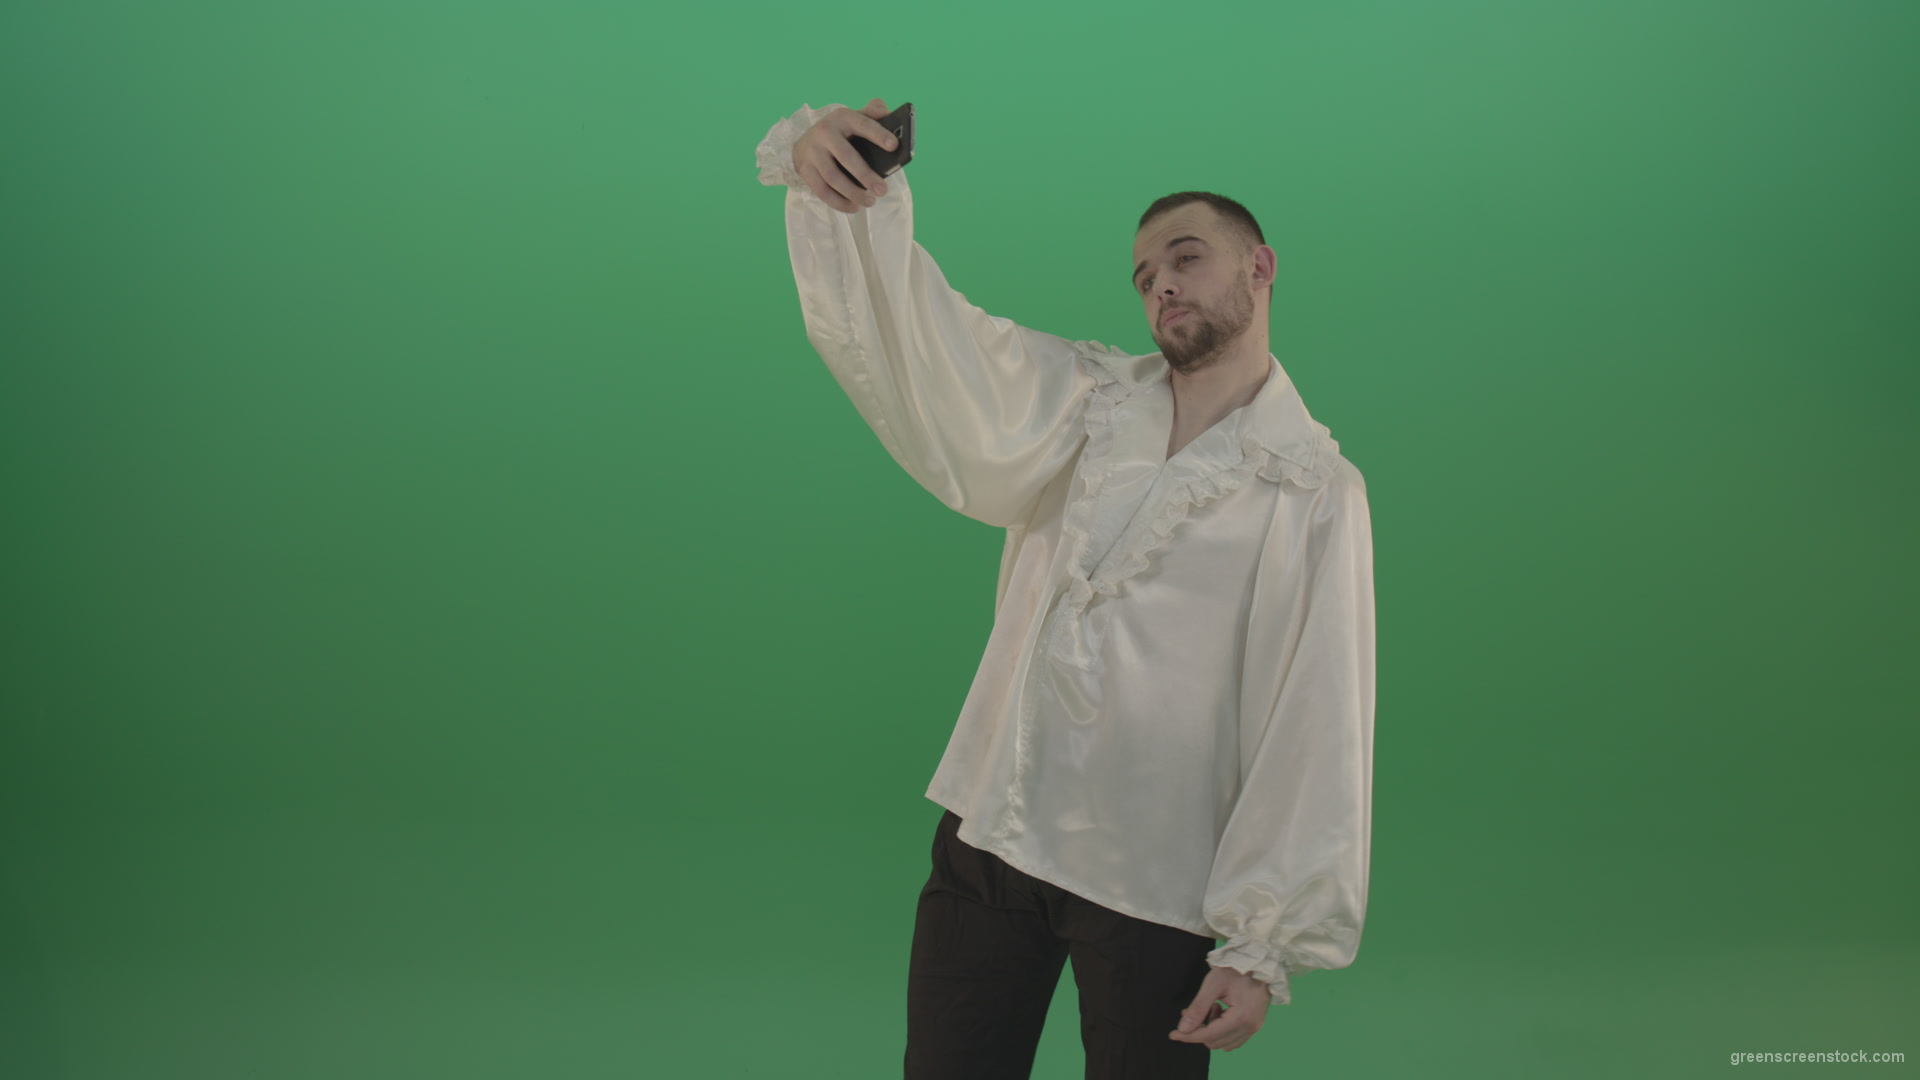 Guy-makes-a-selphi-and-posing-to-the-camera-isolated-on-green-screen_005 Green Screen Stock